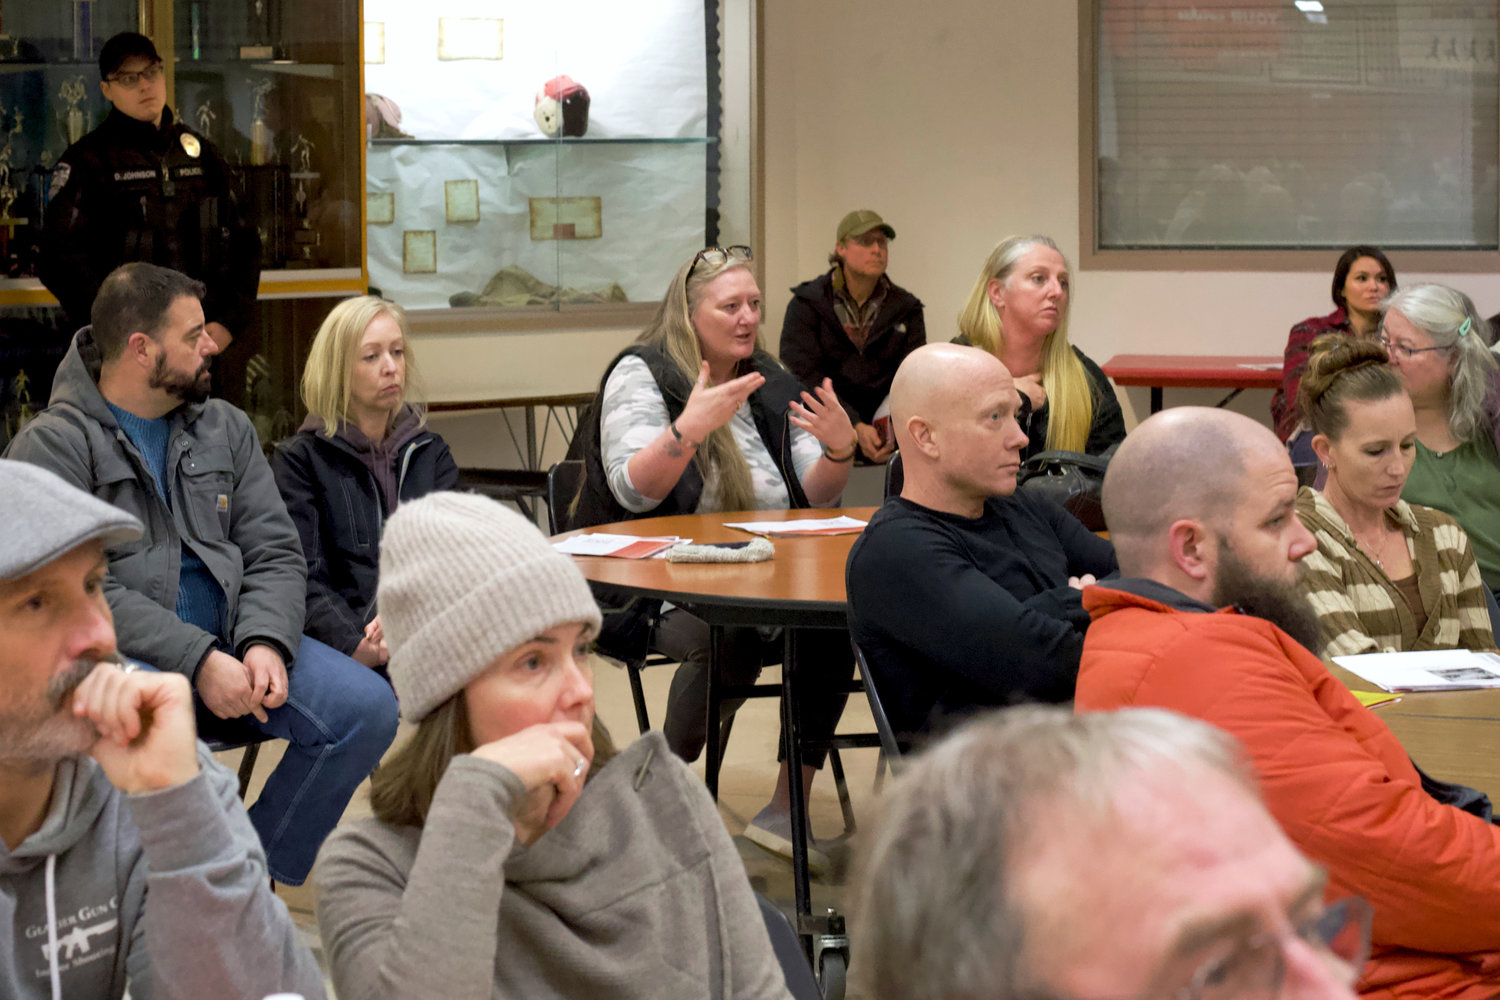 A Tenino-area resident asks a question during a community meeting at Tenino High School on Sunday where residents gathered to discuss plans to oppose a Supreme Living-run Less Restrictive Alternative facility for sex offenders.